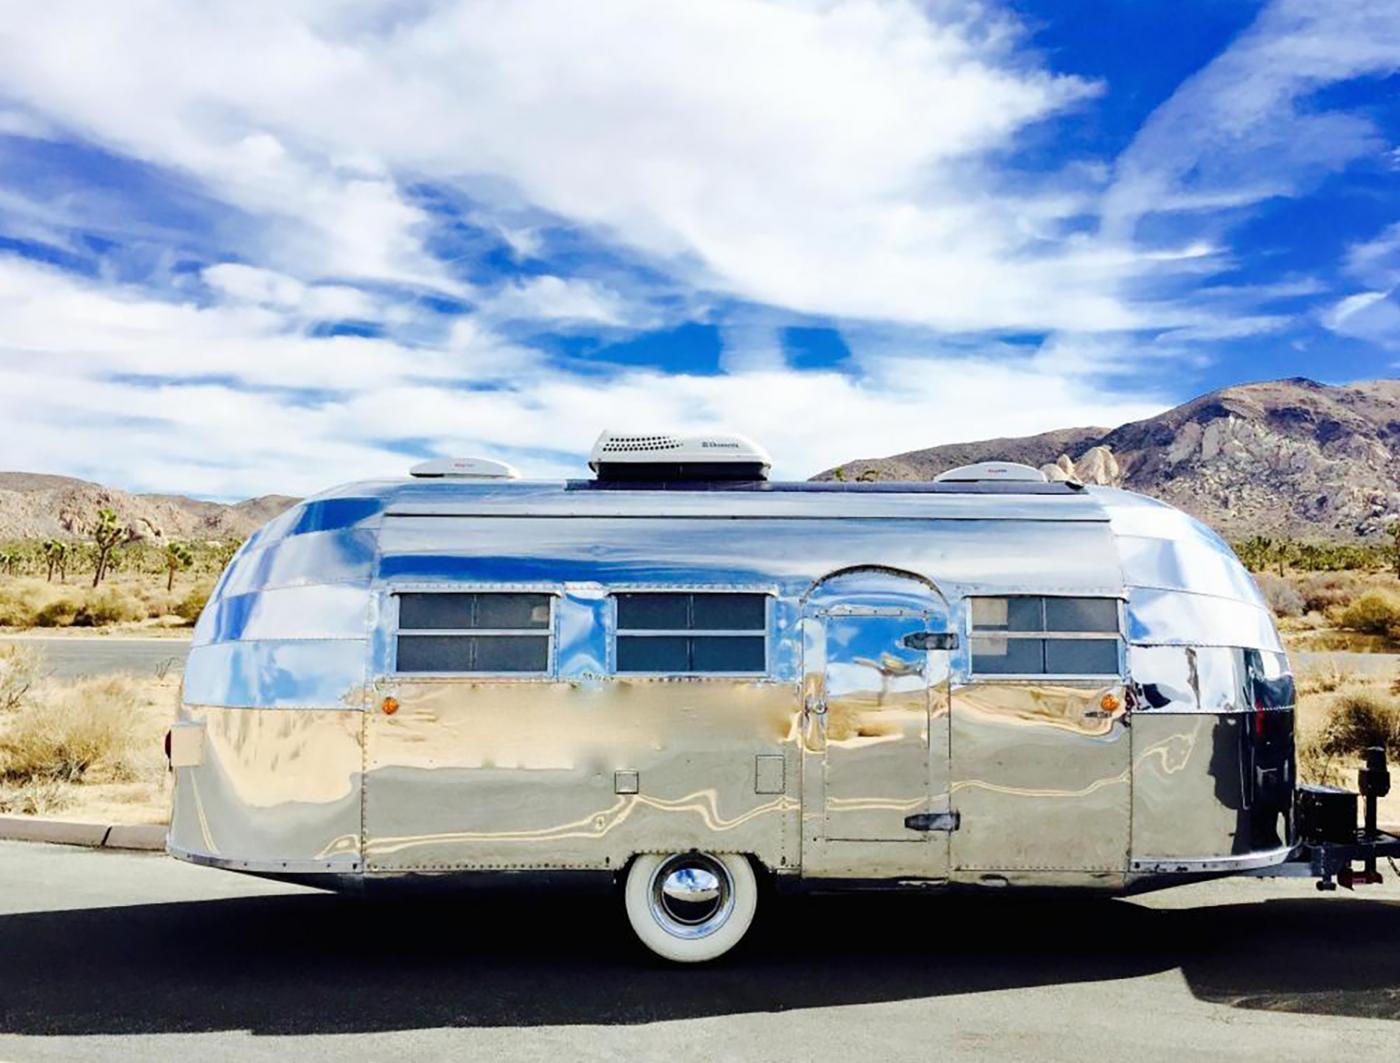 Travel across the nation in this home on wheels